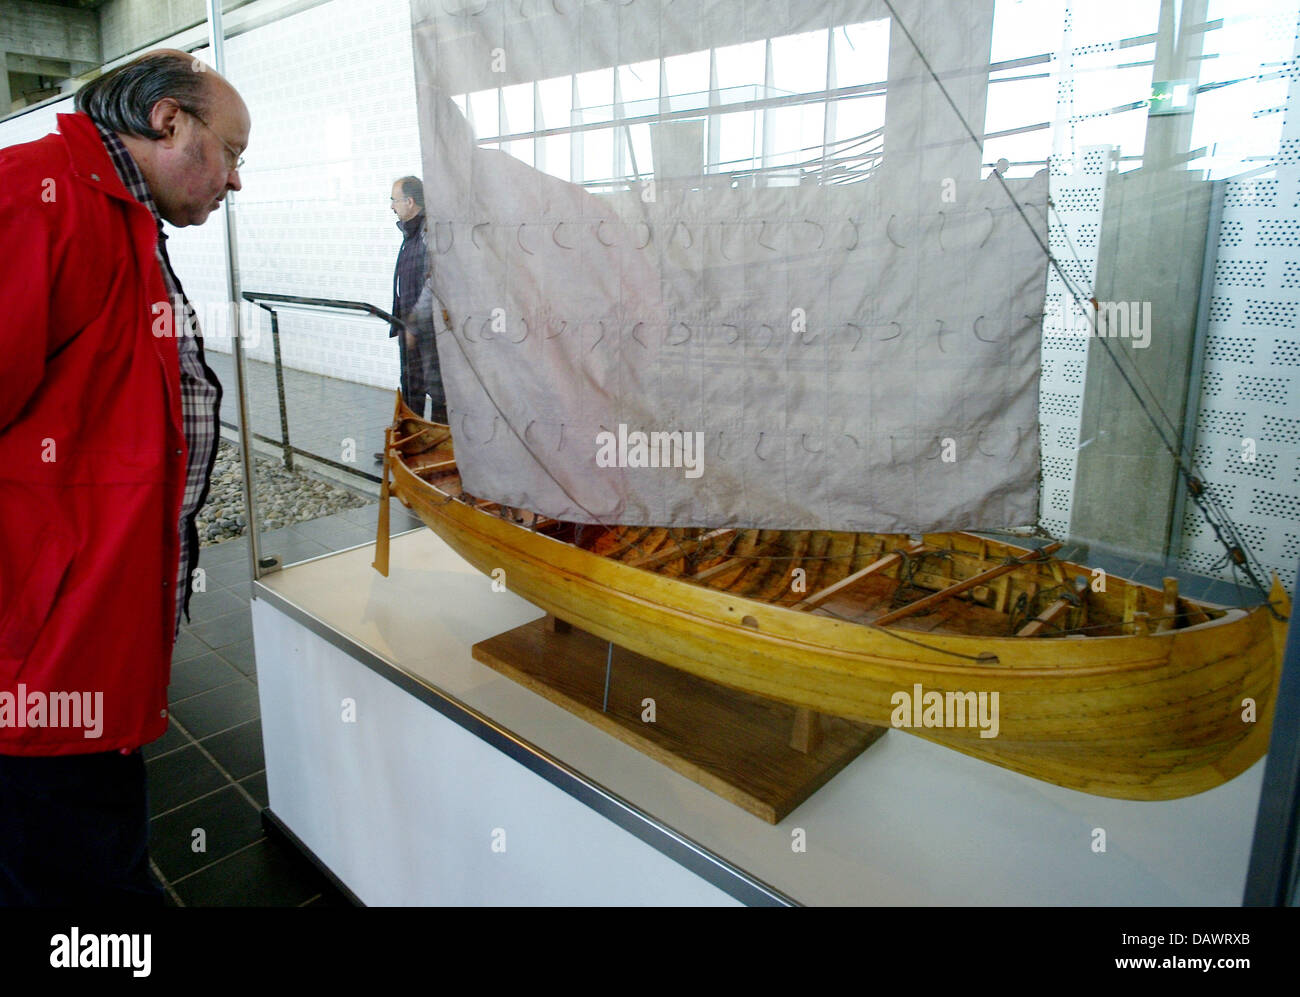 A visitor takes a look at a model of a Viking ship of the 11th century, discoverd in the Roskilde fjord in 1962, in the ship hall of the museum for Viking ships in Roskilde, Denmark, 22 May 2007. Shipbuilding and seafaring of the Vikings are presented in the museum that has its own wharf and an archaeological workshop and offers Viking ship boat trips in the summer. Photo: Maurizio Stock Photo